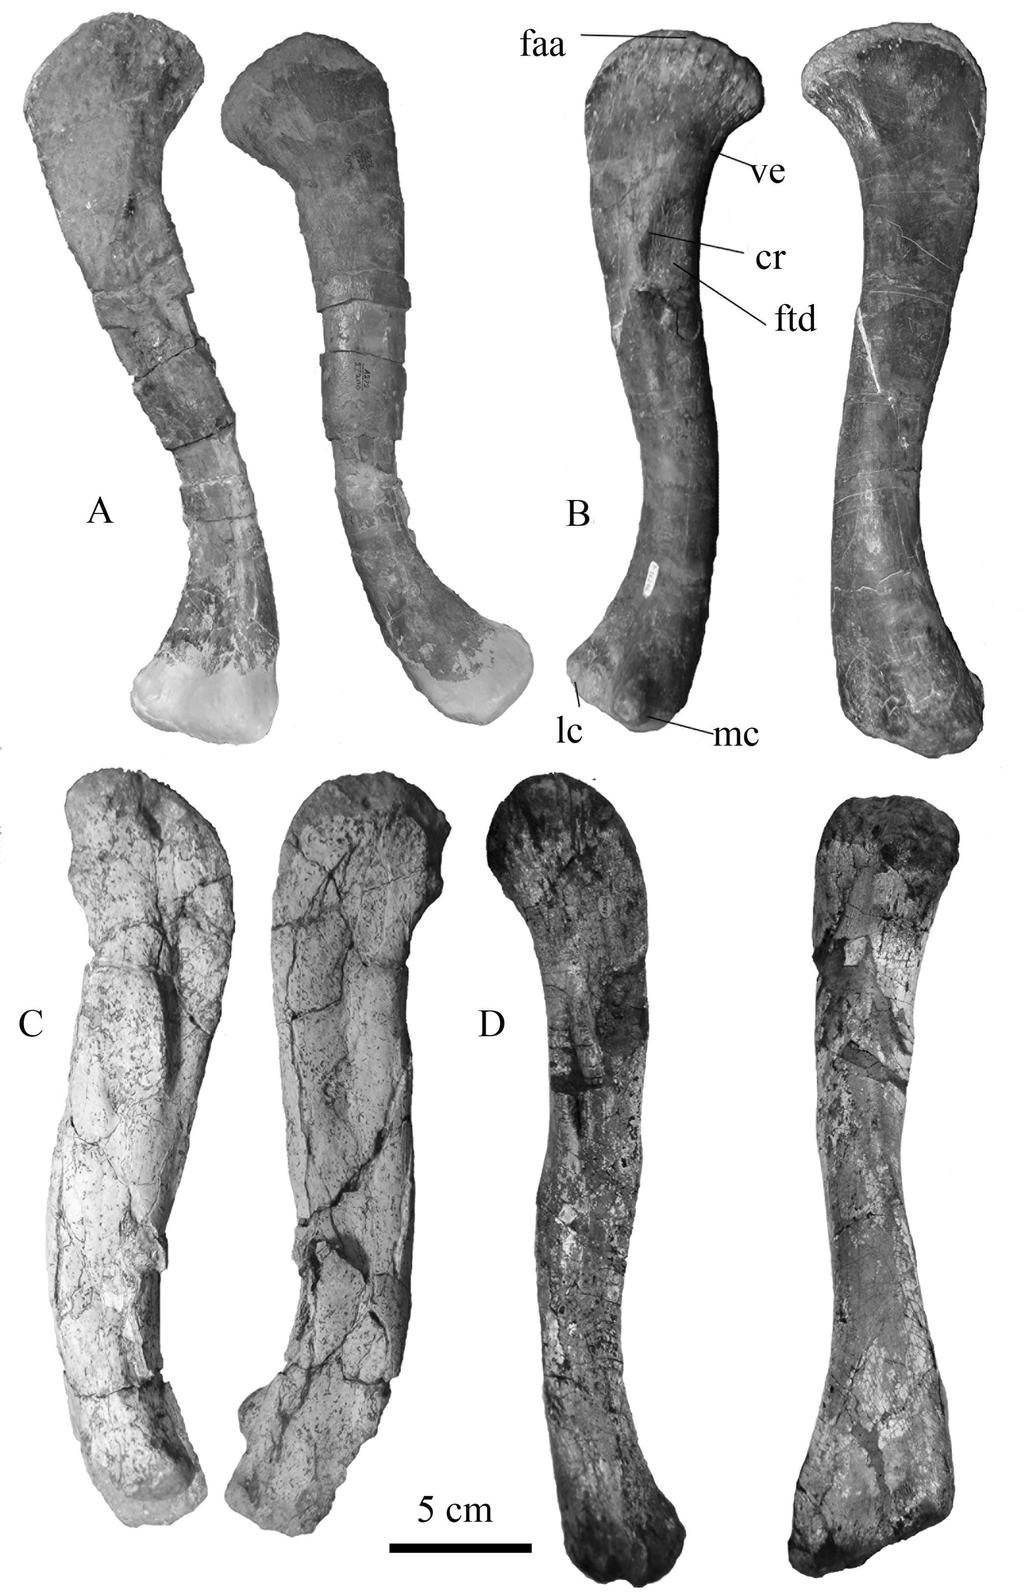 309 FIGURE 4. A, Left femur of Leptosuchus crosbiensis (UCMP 27200) in lateral and medial view. B, Left femur of Pseudopalatus buceros (NMMNH P-56268) in lateral and medial view.